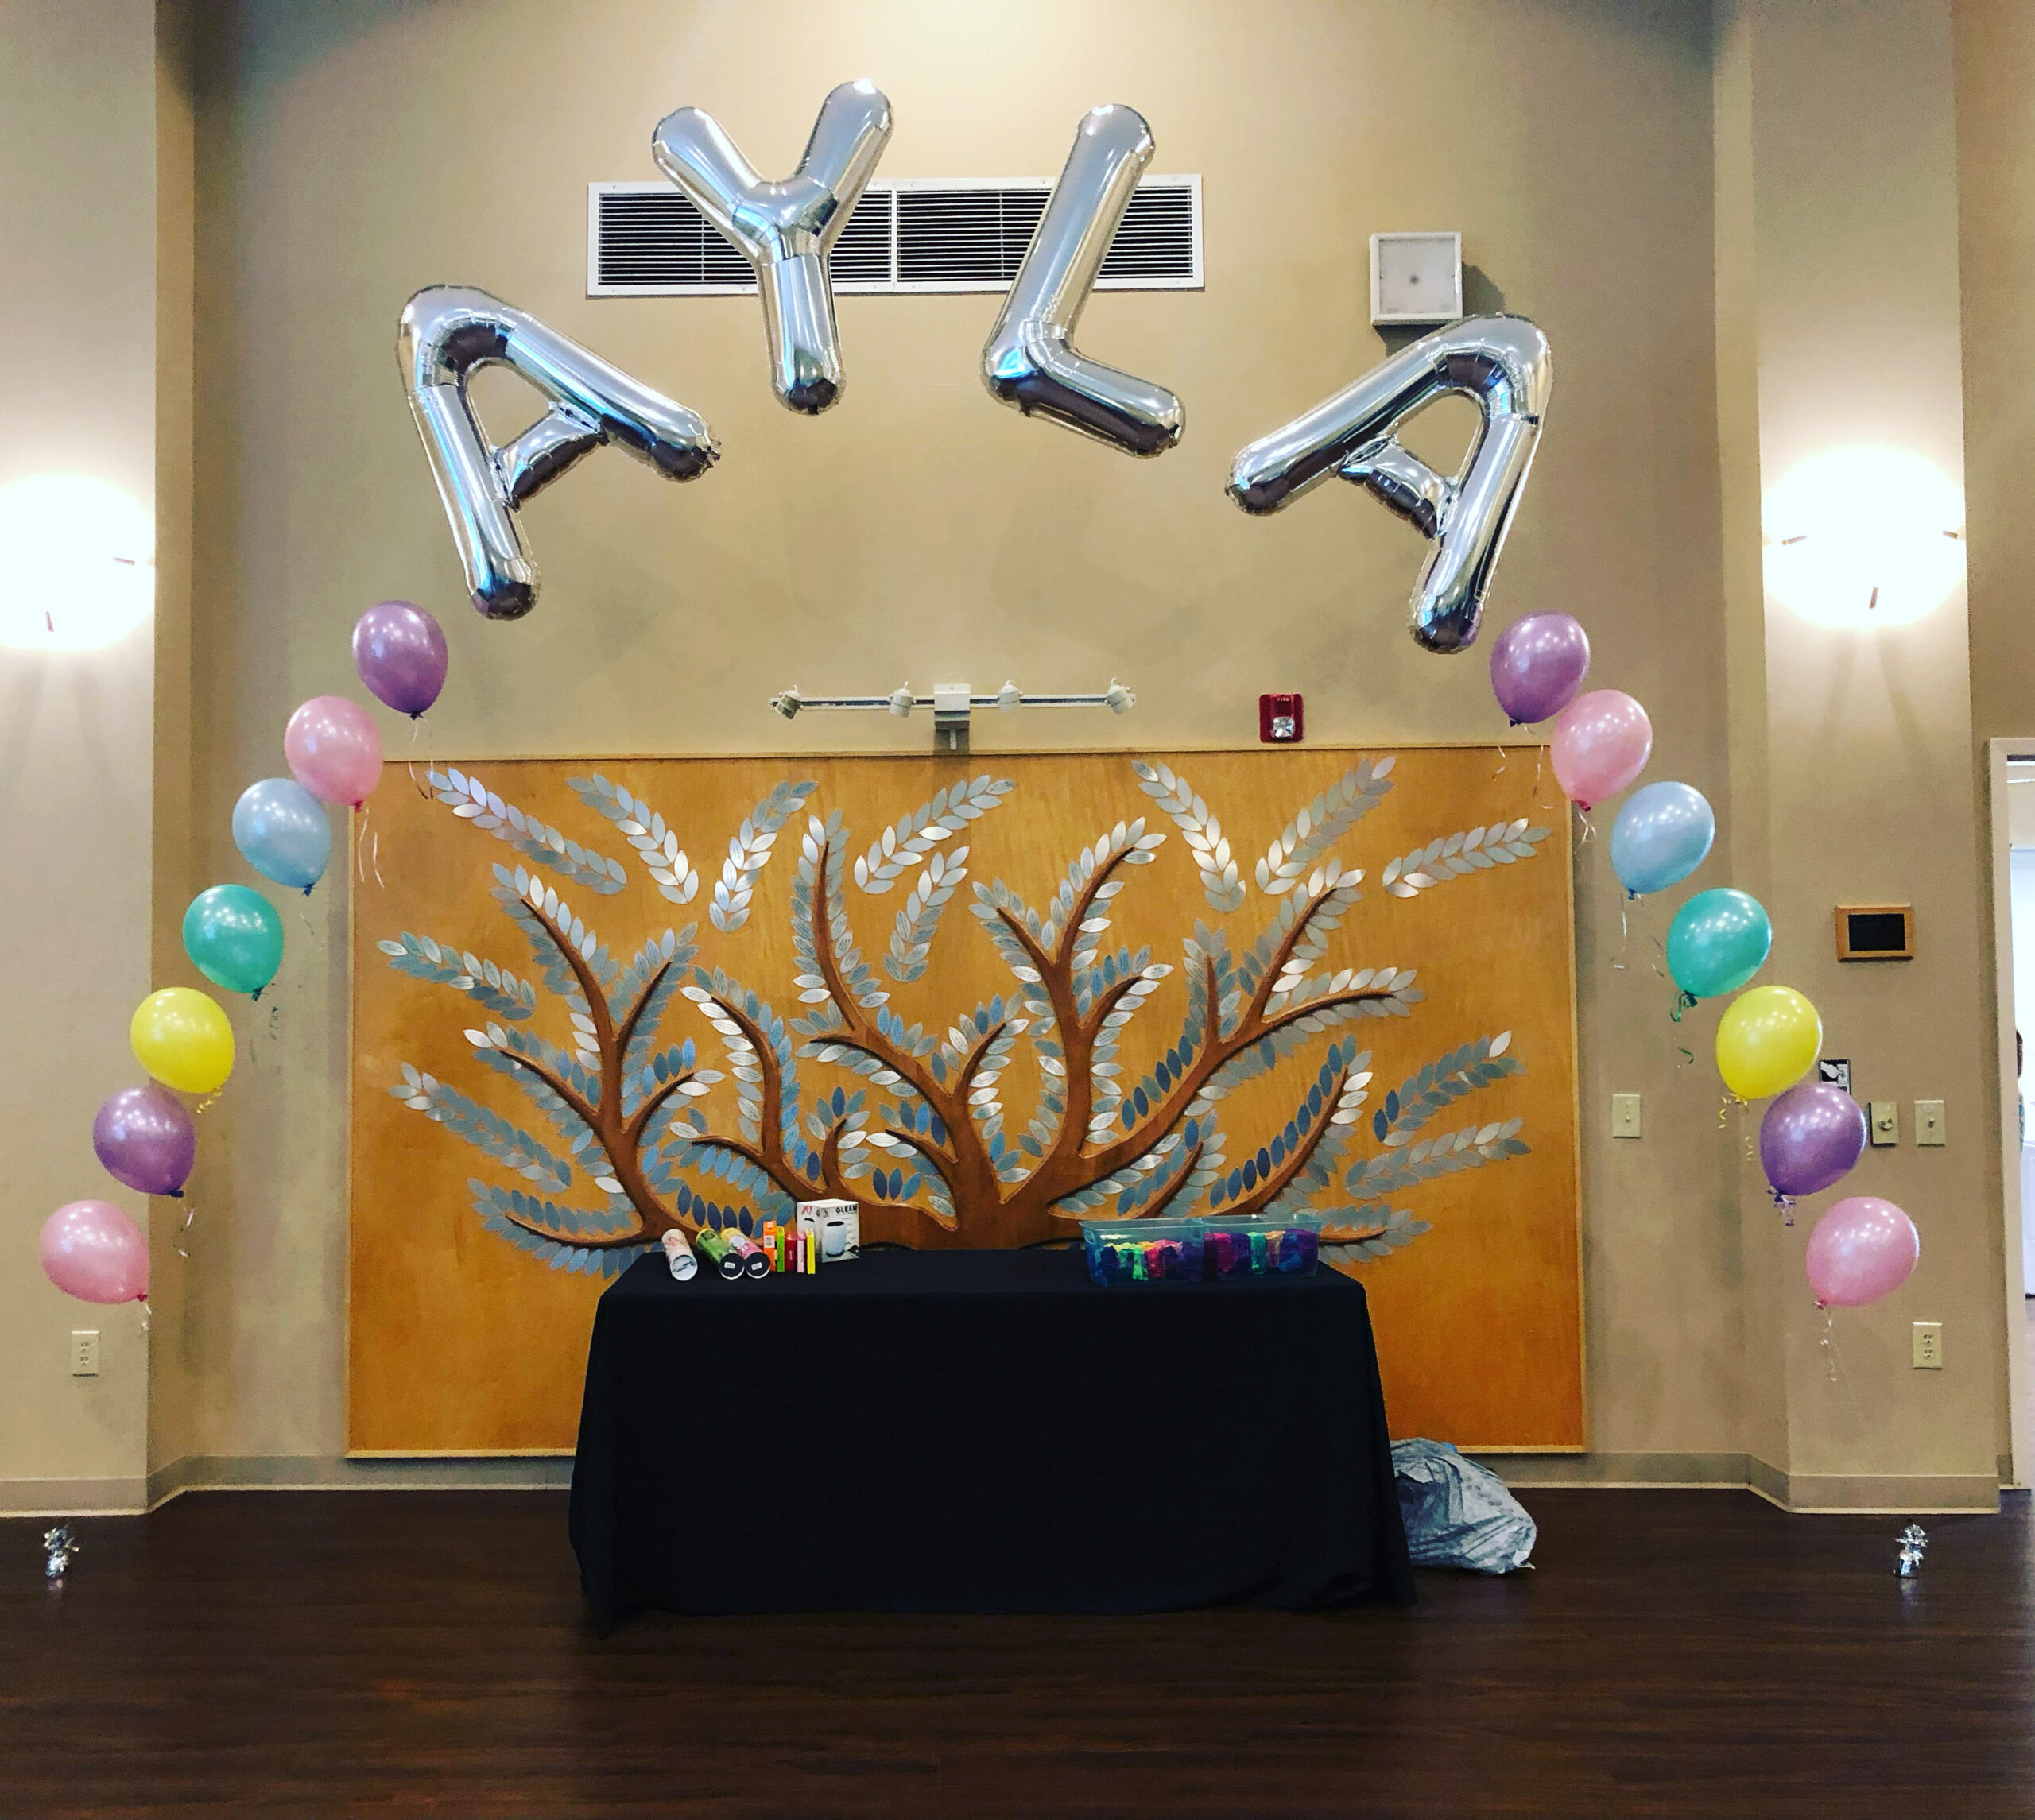 String of Pearls
Balloon Arch